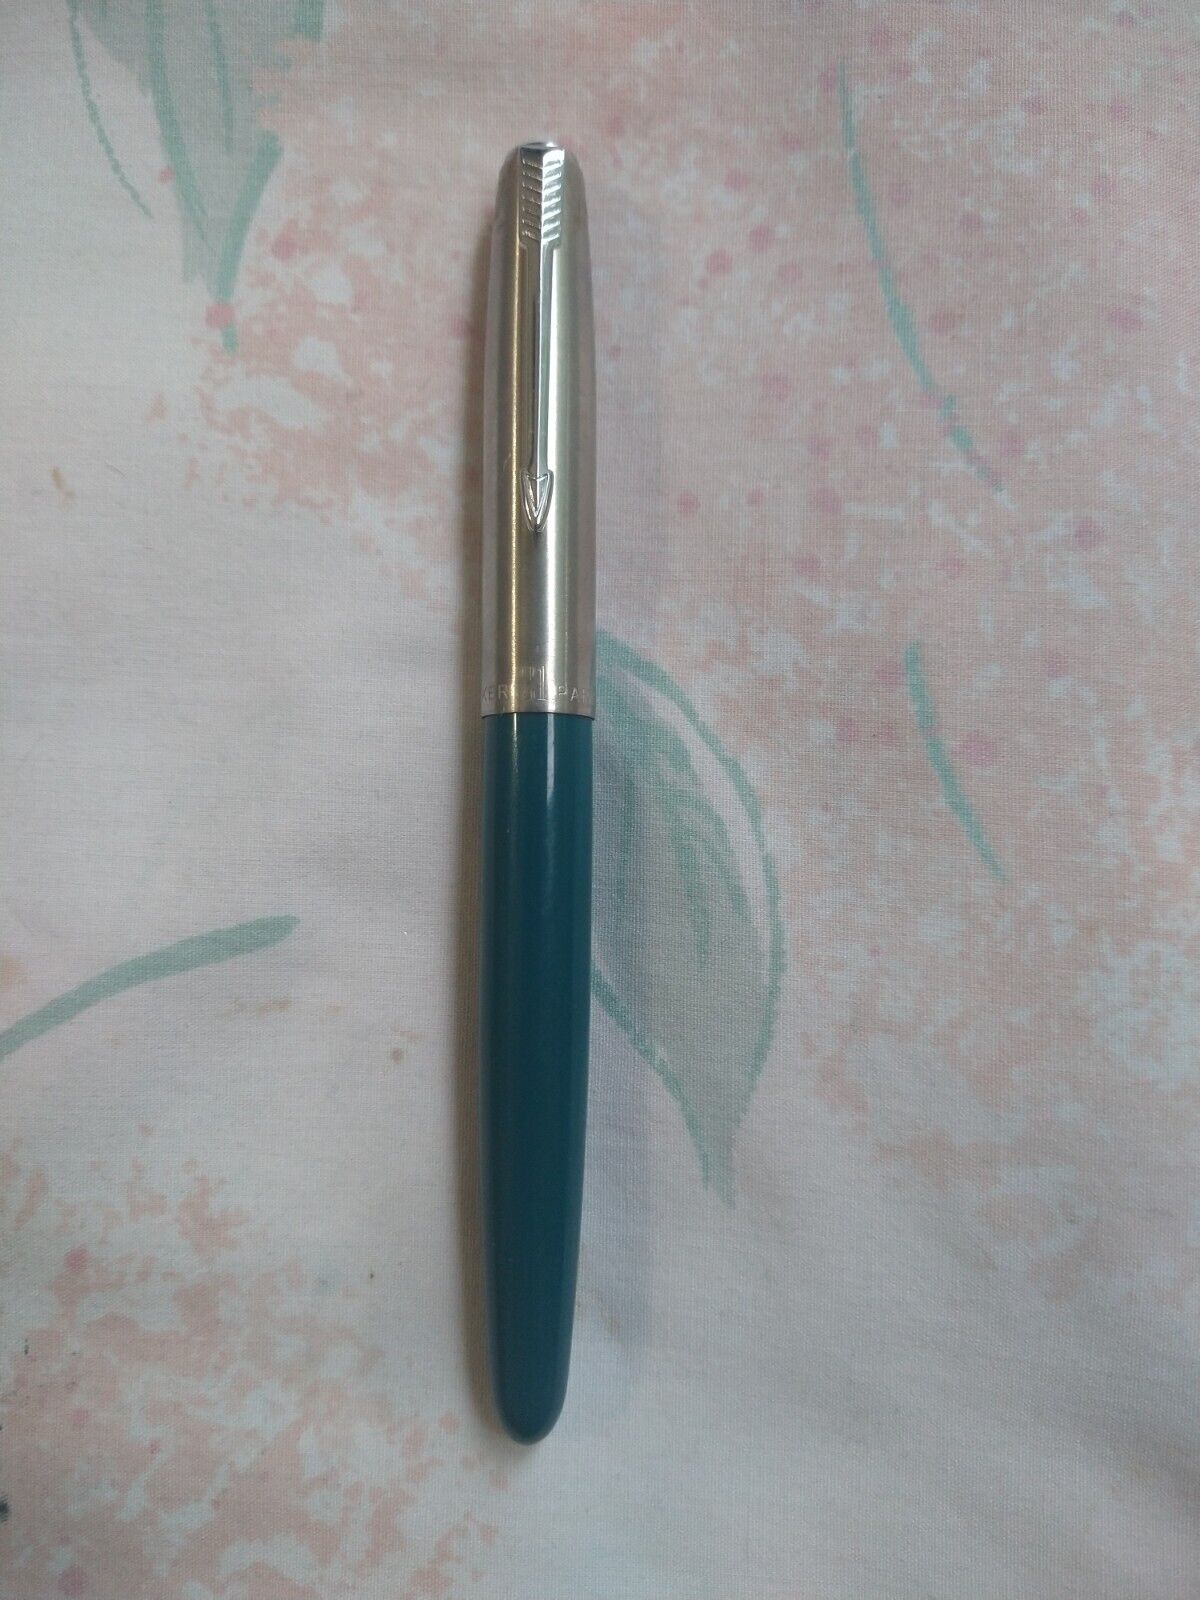 Parker 21 Special Chrome Cap, Turquoise, Fine Stainless Steel Nib Fountain pen